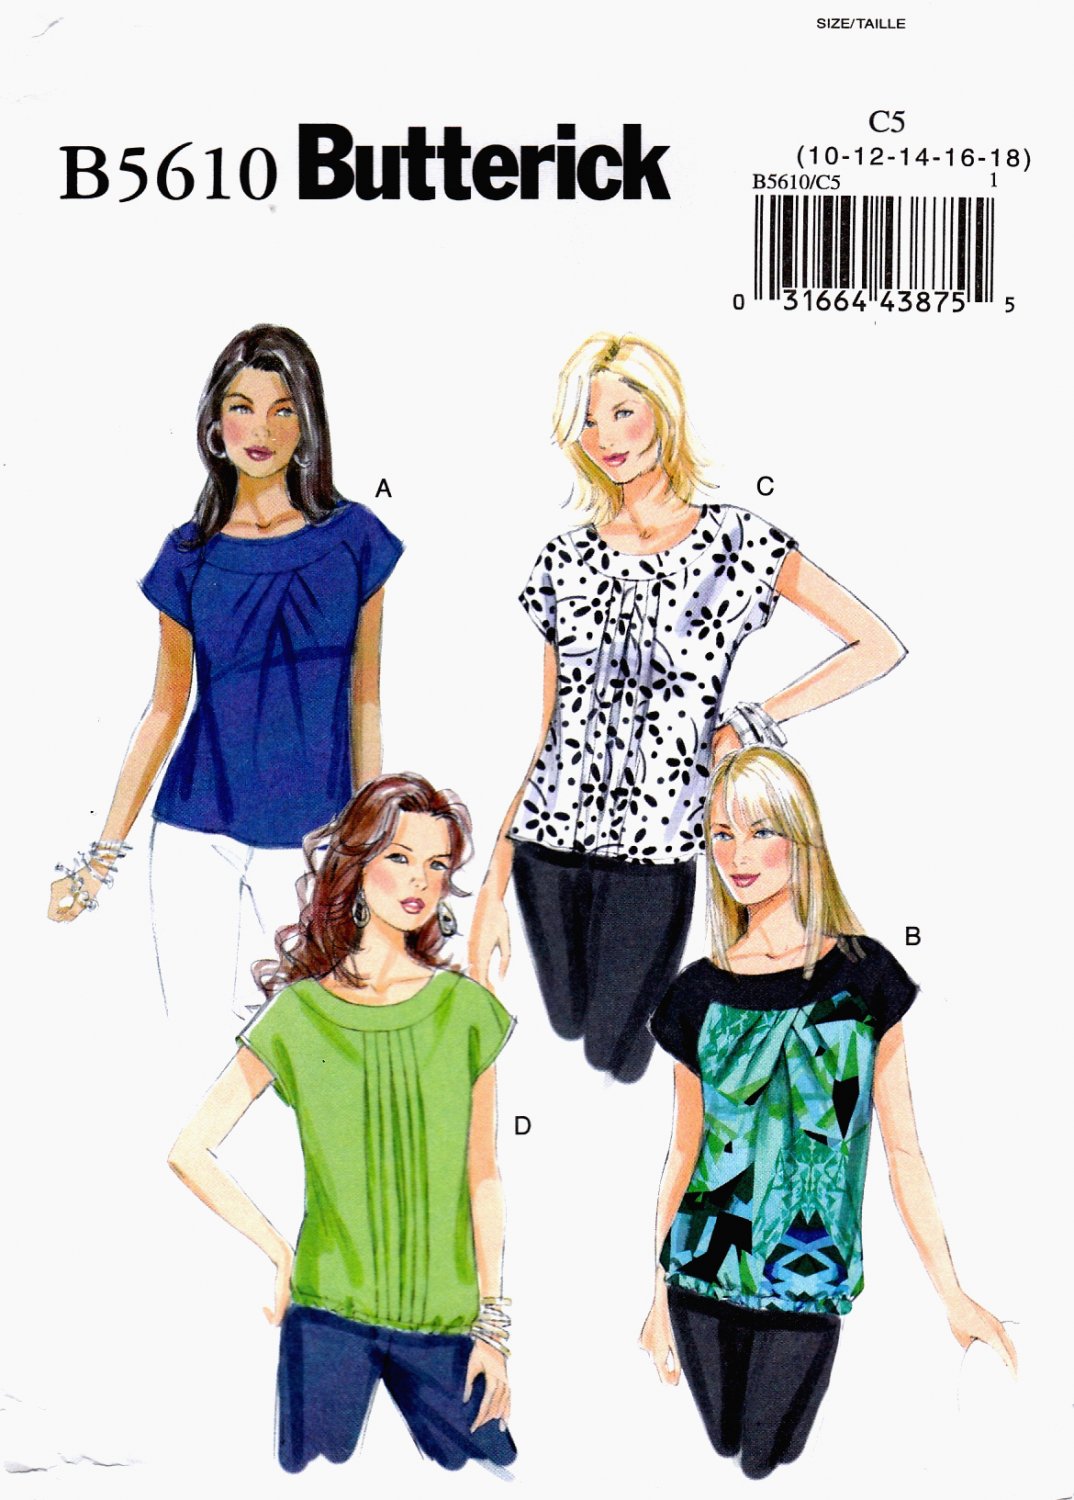 Butterick B5610 Misses Tops Very Loose Fitting Pullover Sewing Pattern Sizes 10-12-14-16-18